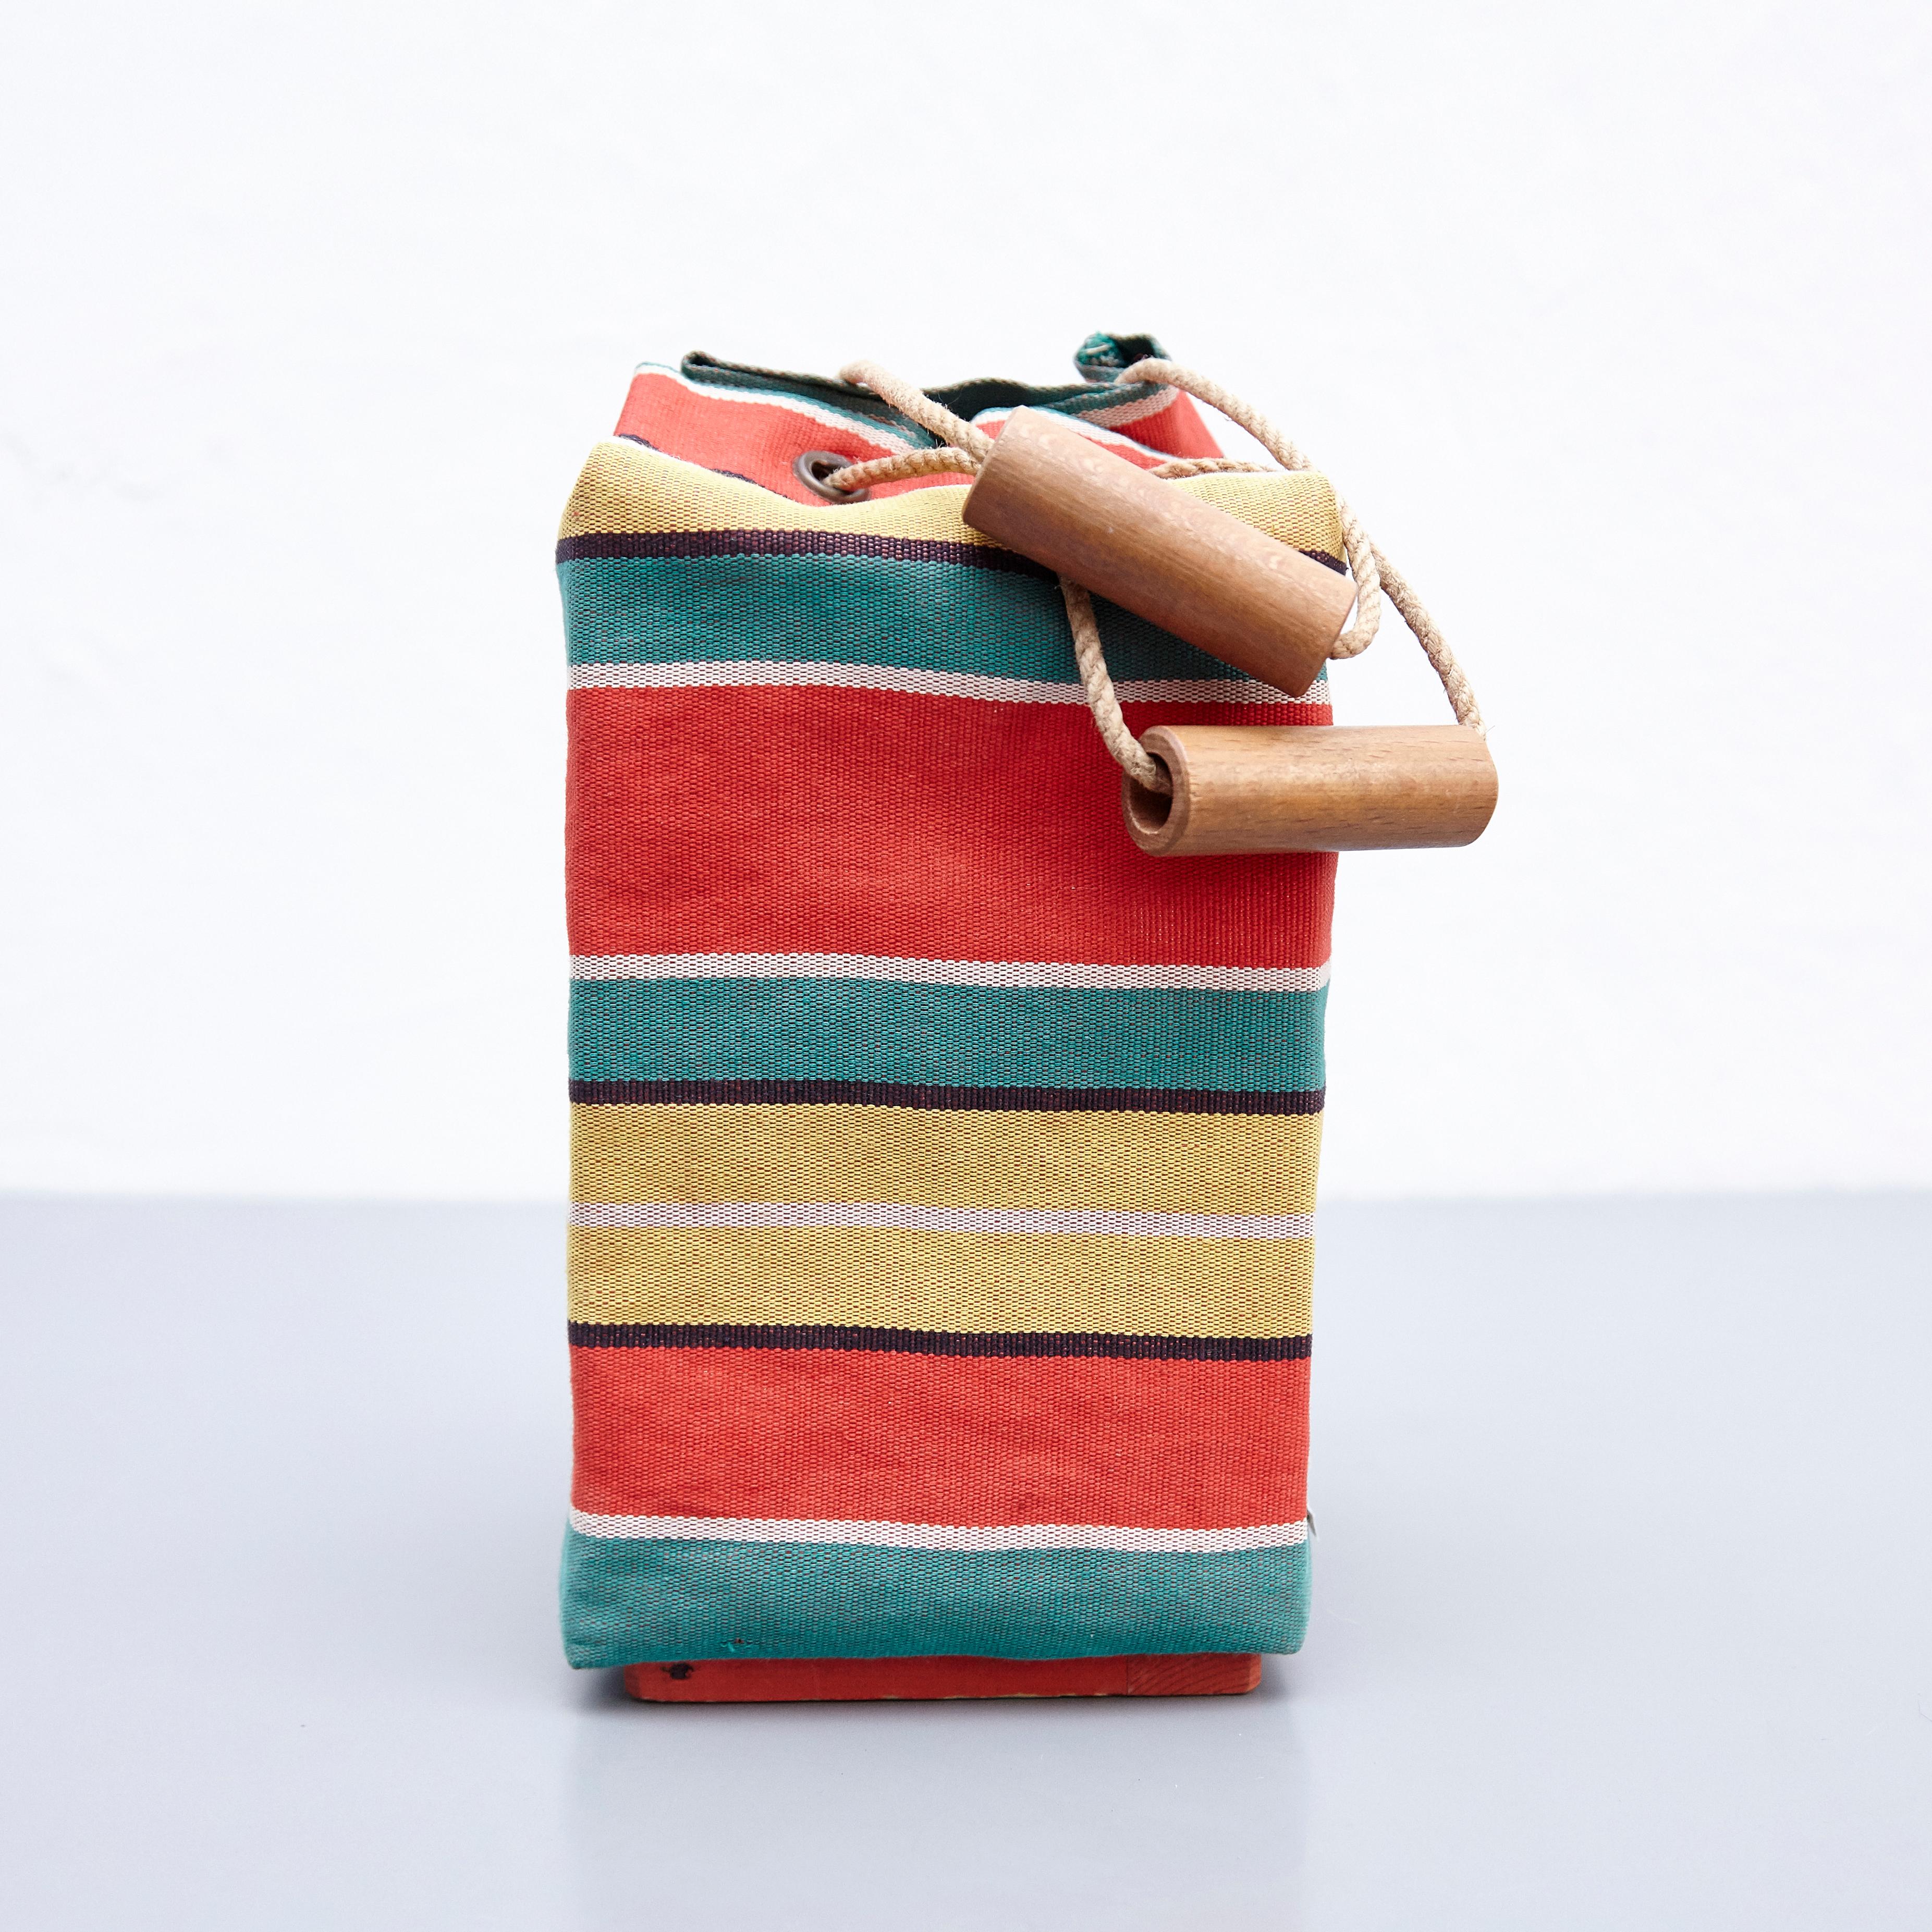 Toy designed by Ko Verzuu, circa 1930.
Manufactured by ADO in Netherlands.

ADO Blokken, canvas bag with a set of wooden blocks / cubes to play.

In good original condition, with minor wear consistent with age and use, preserving a beautiful